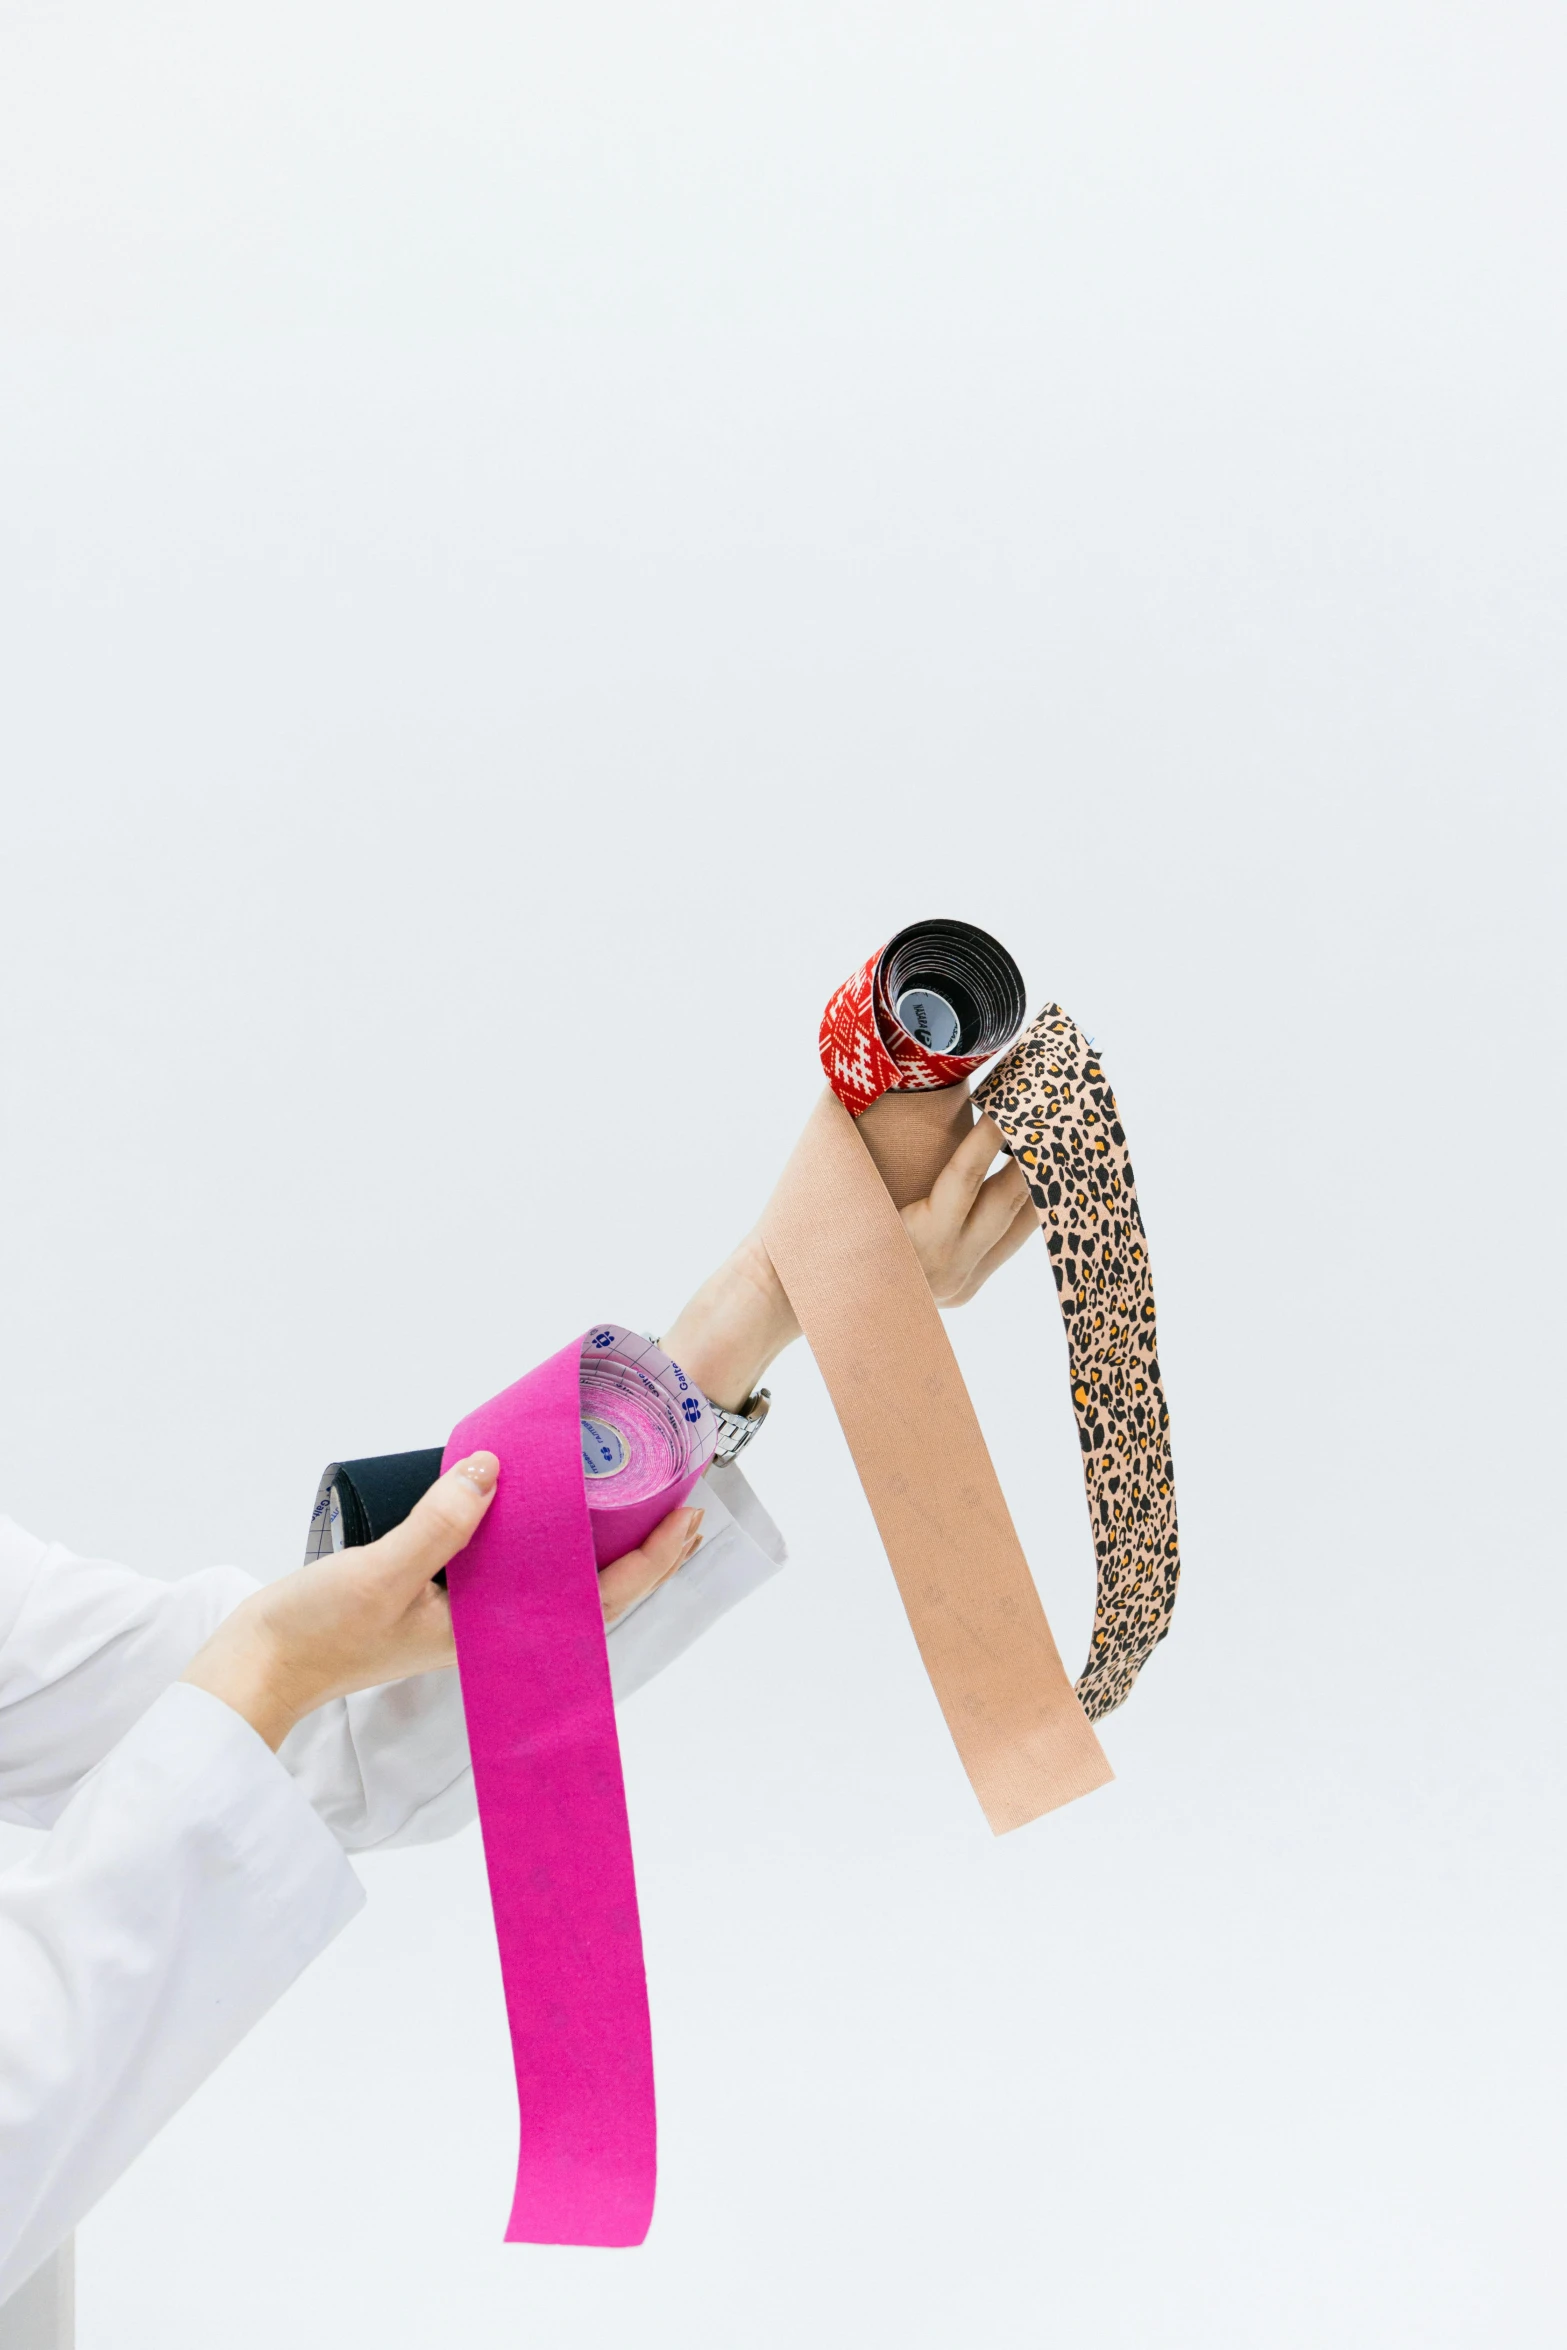 a woman in a white shirt holding a pink ribbon, by Nina Hamnett, trending on unsplash, with a robotic arm, with a white background, patterned, disposable colored camera